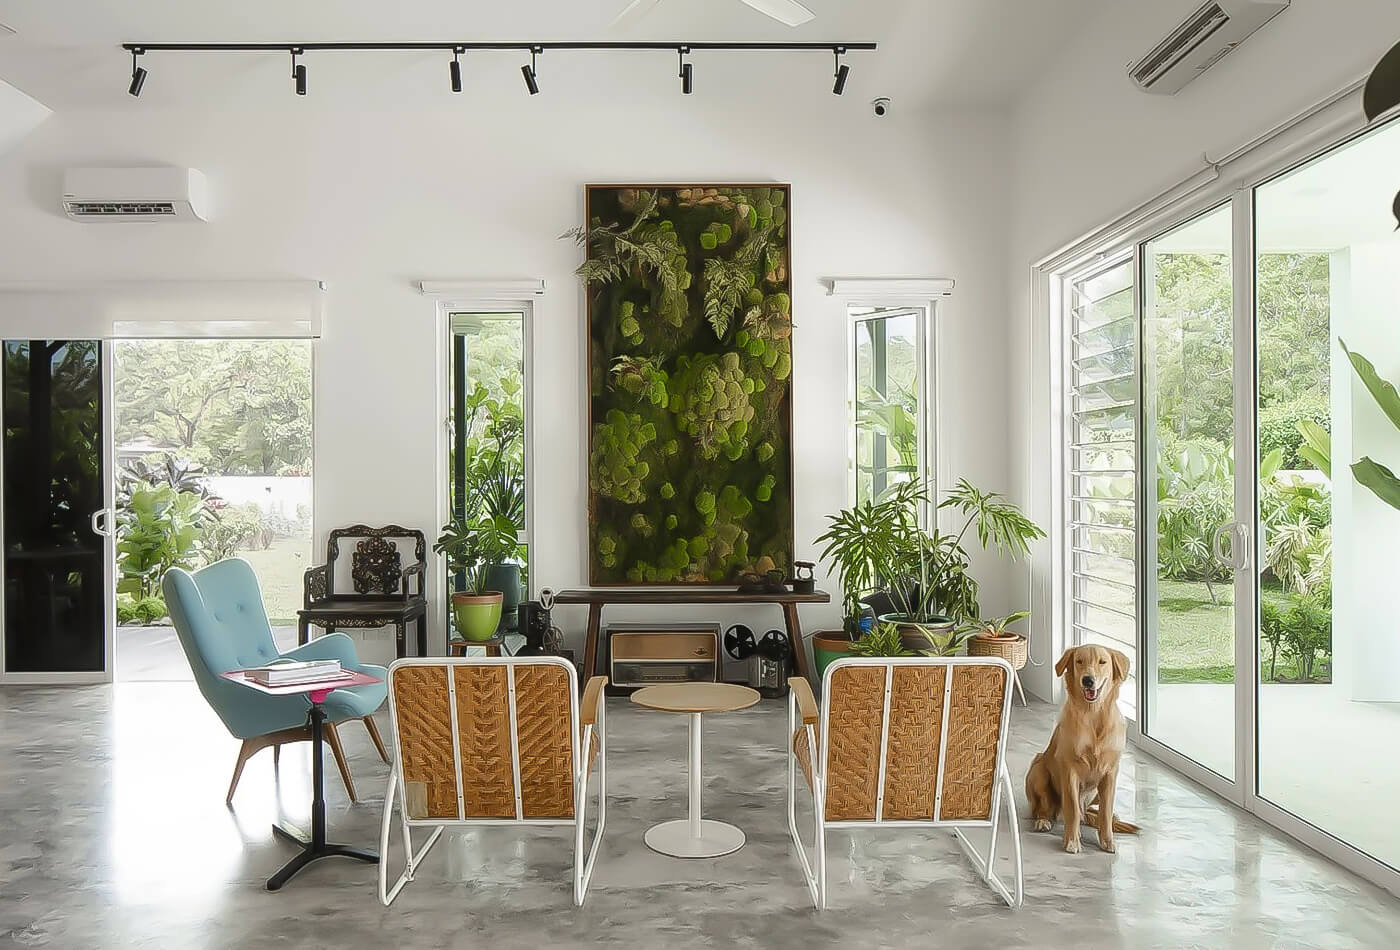 Pet-friendly Design: Home That Welcomes Four-legged Friends